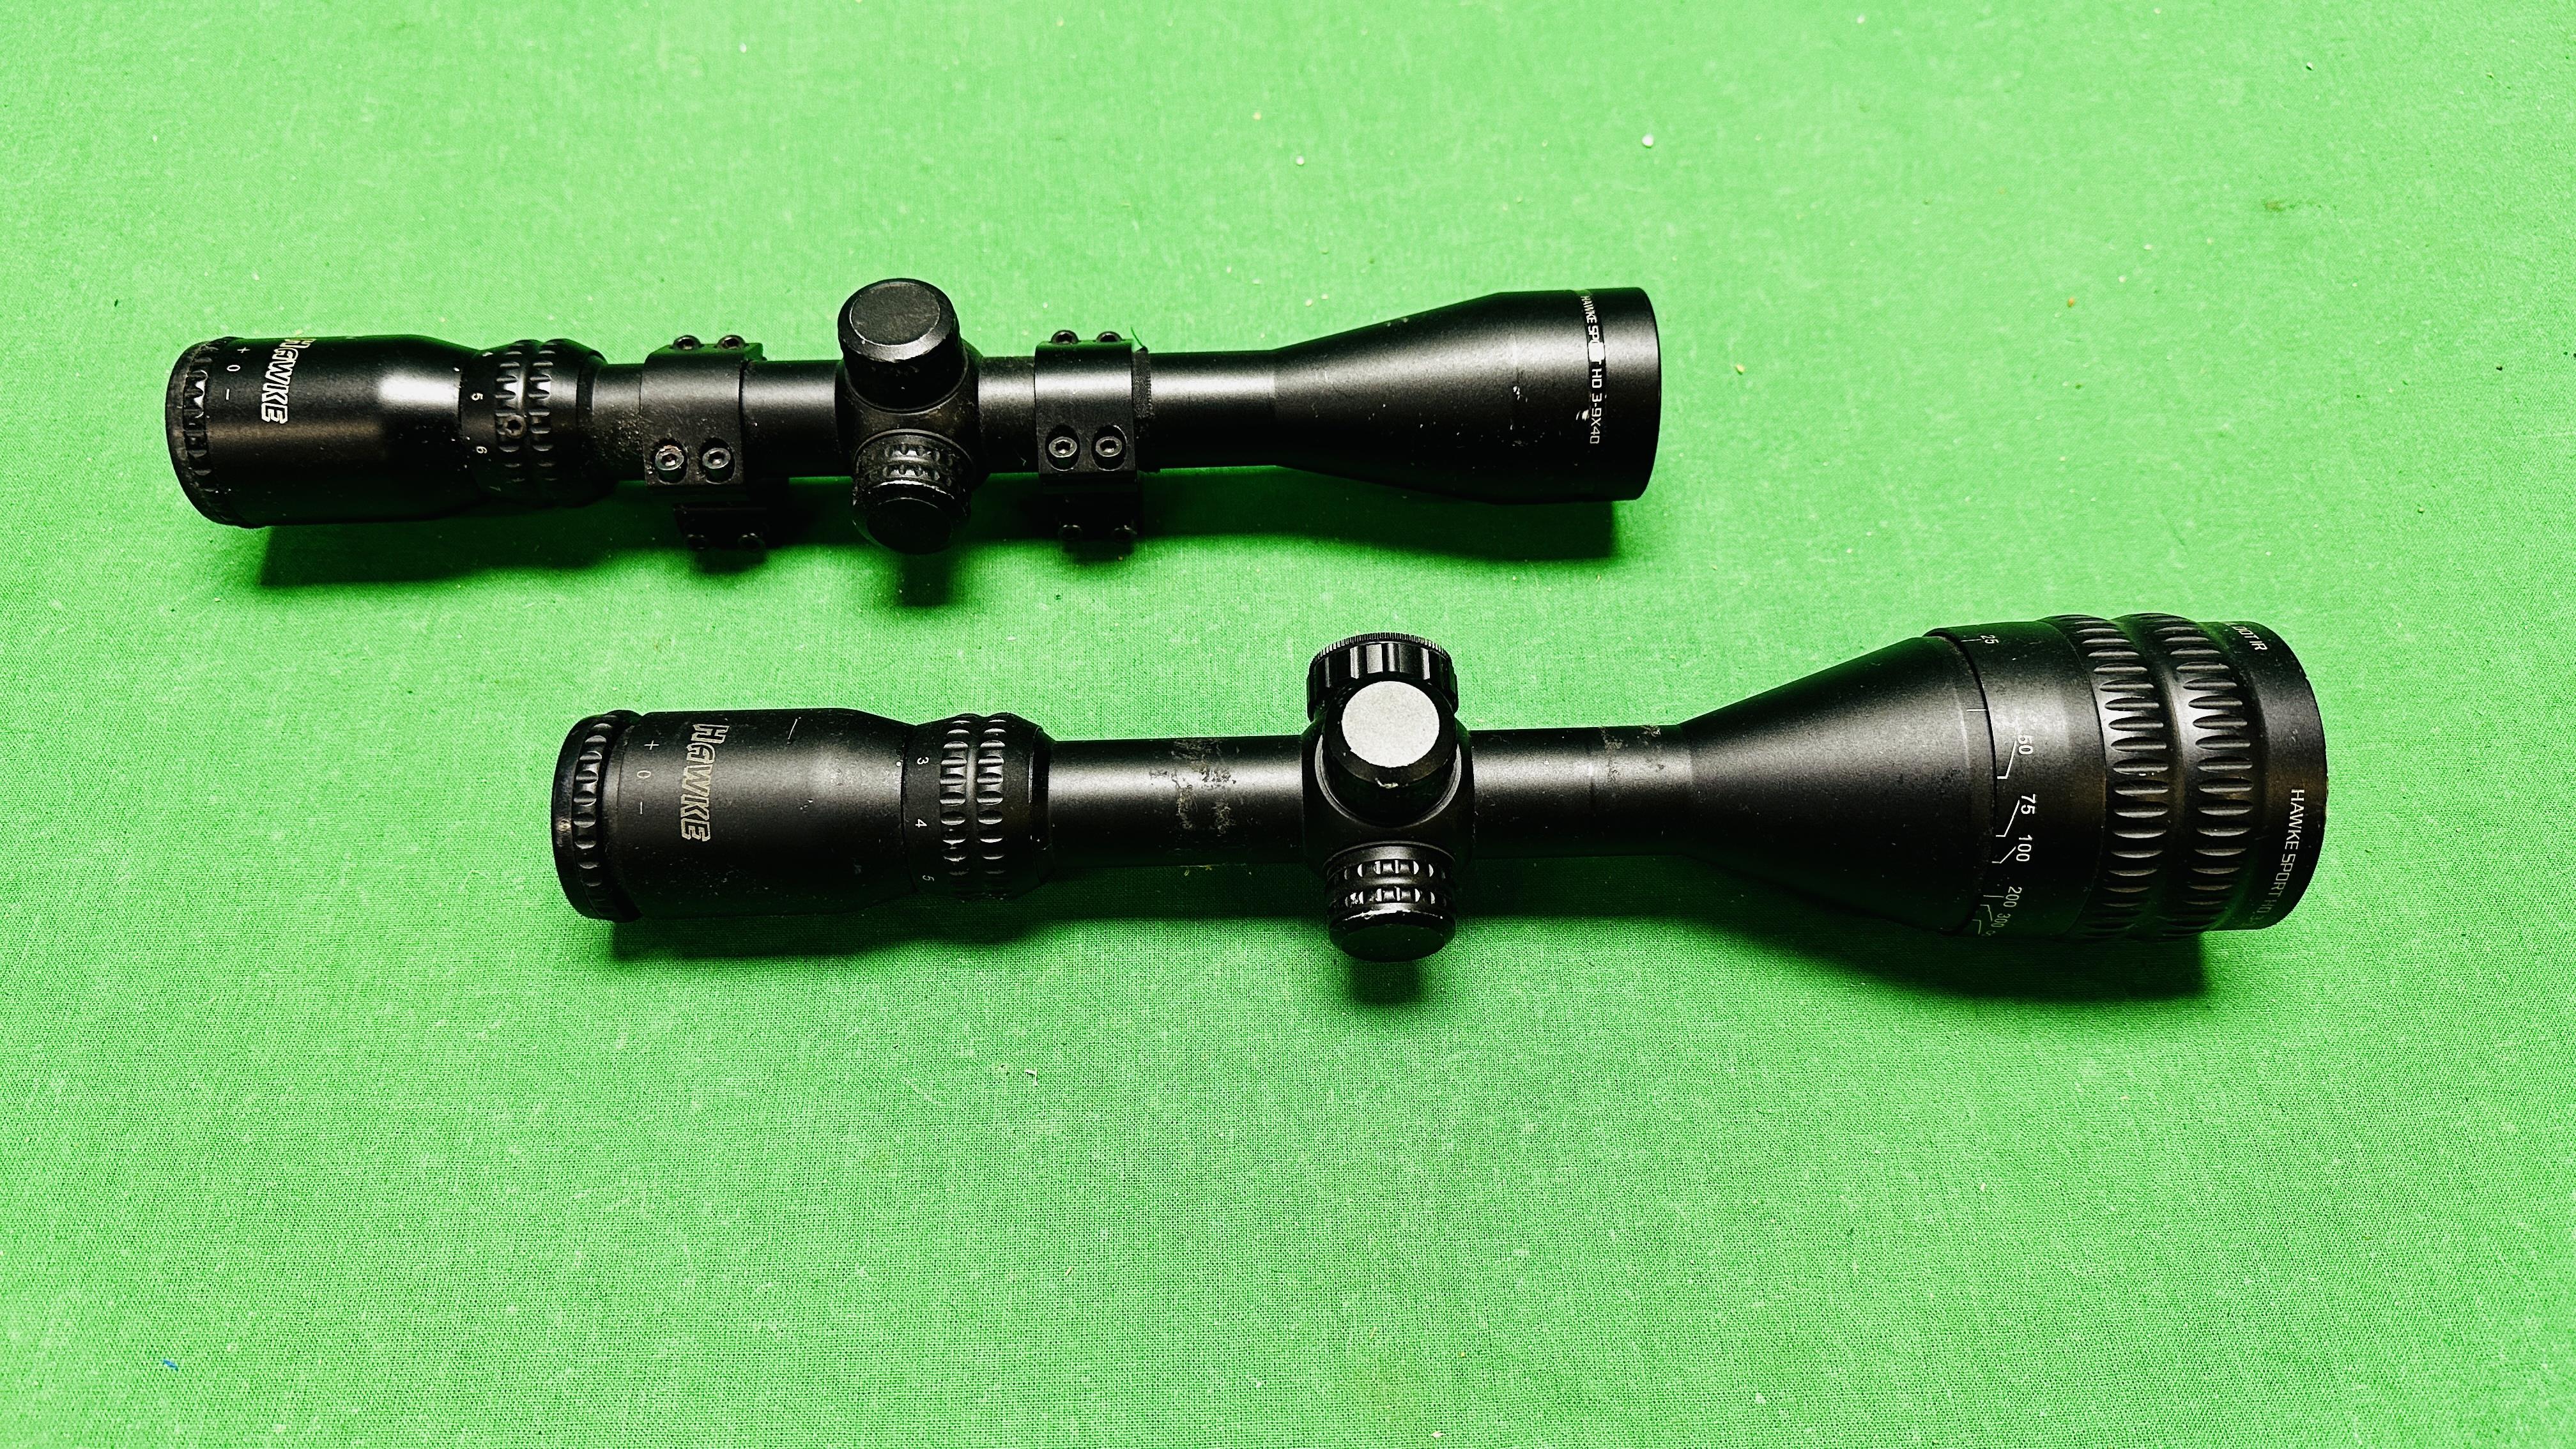 TWO HAWKE RIFLE SCOPES TO INCLUDE SPORT HD 3-9X40 WITH MOUNTS AND SPORT HD 3-9X50 AO MILL DOT IR.